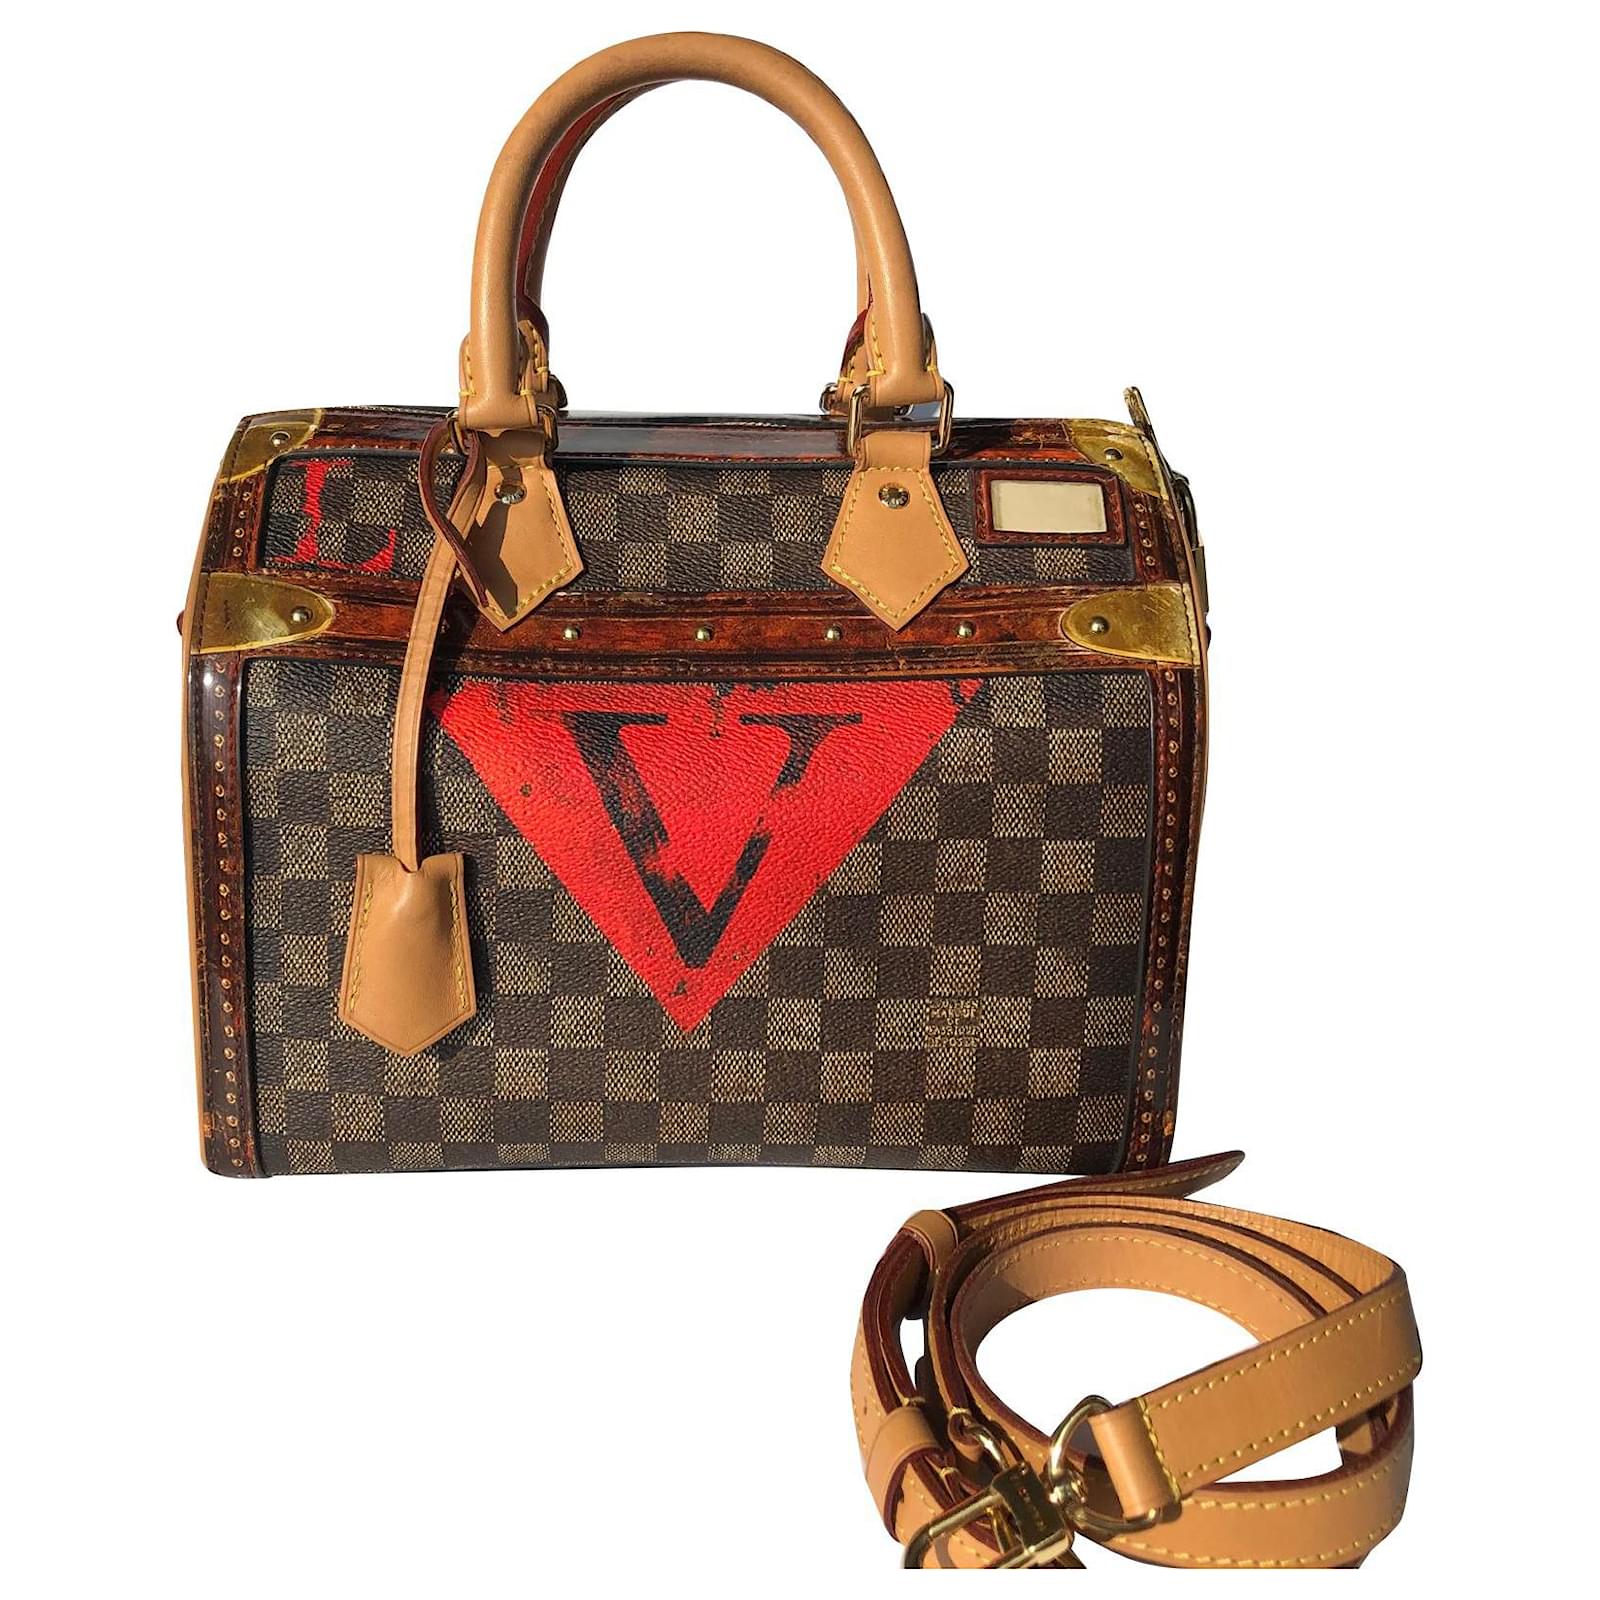 Louis Vuitton Limited Edition Crafty Speedy Bandouliere Bag